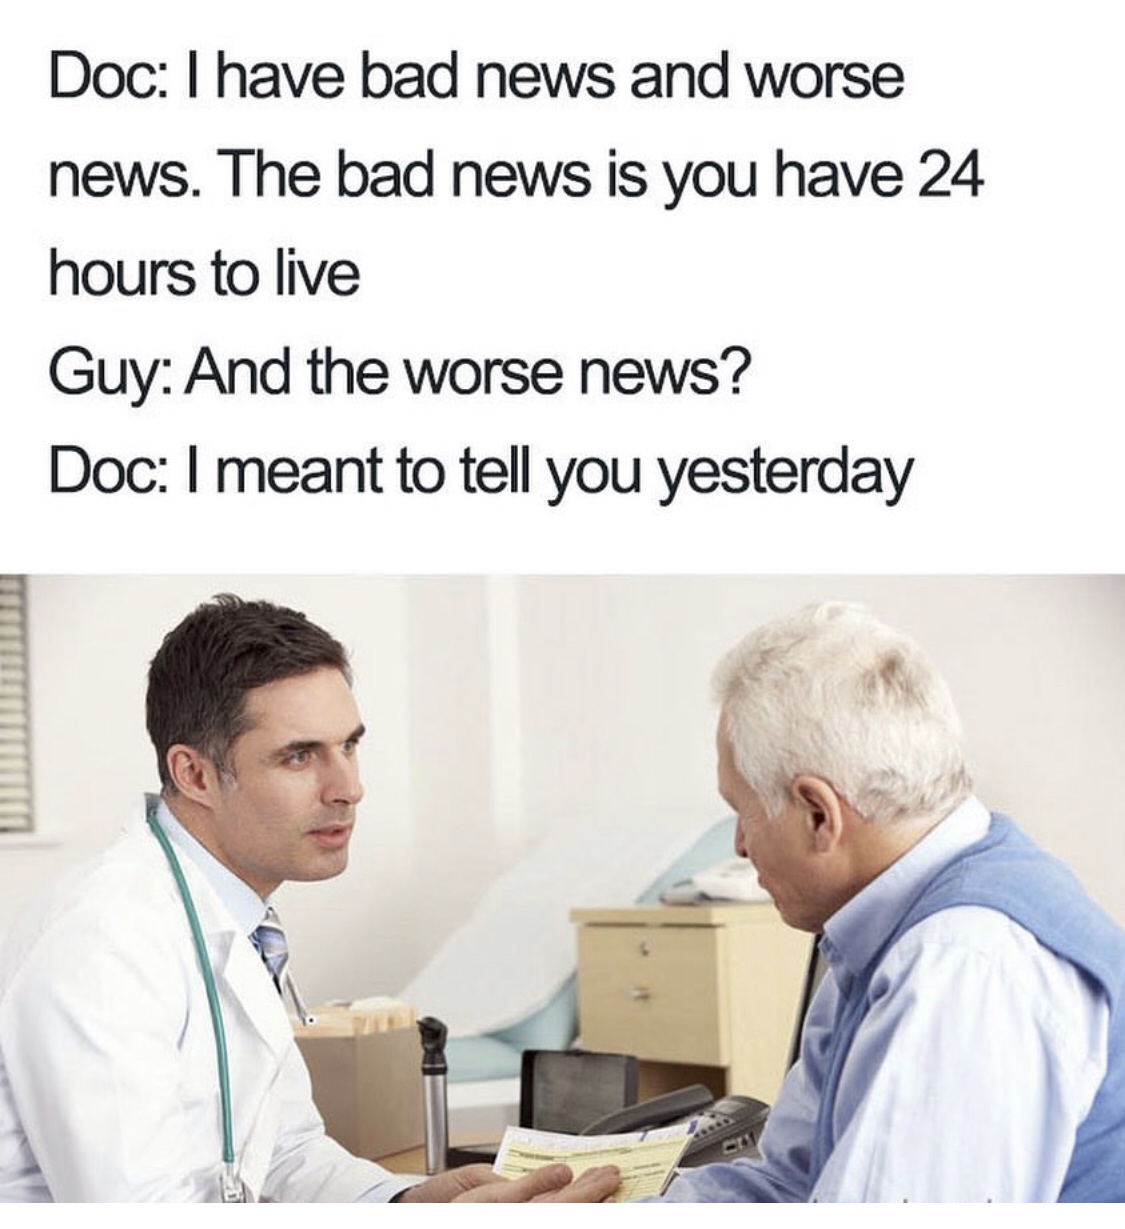 doctor memes - Doc I have bad news and worse news. The bad news is you have 24 hours to live Guy And the worse news? Doc I meant to tell you yesterday